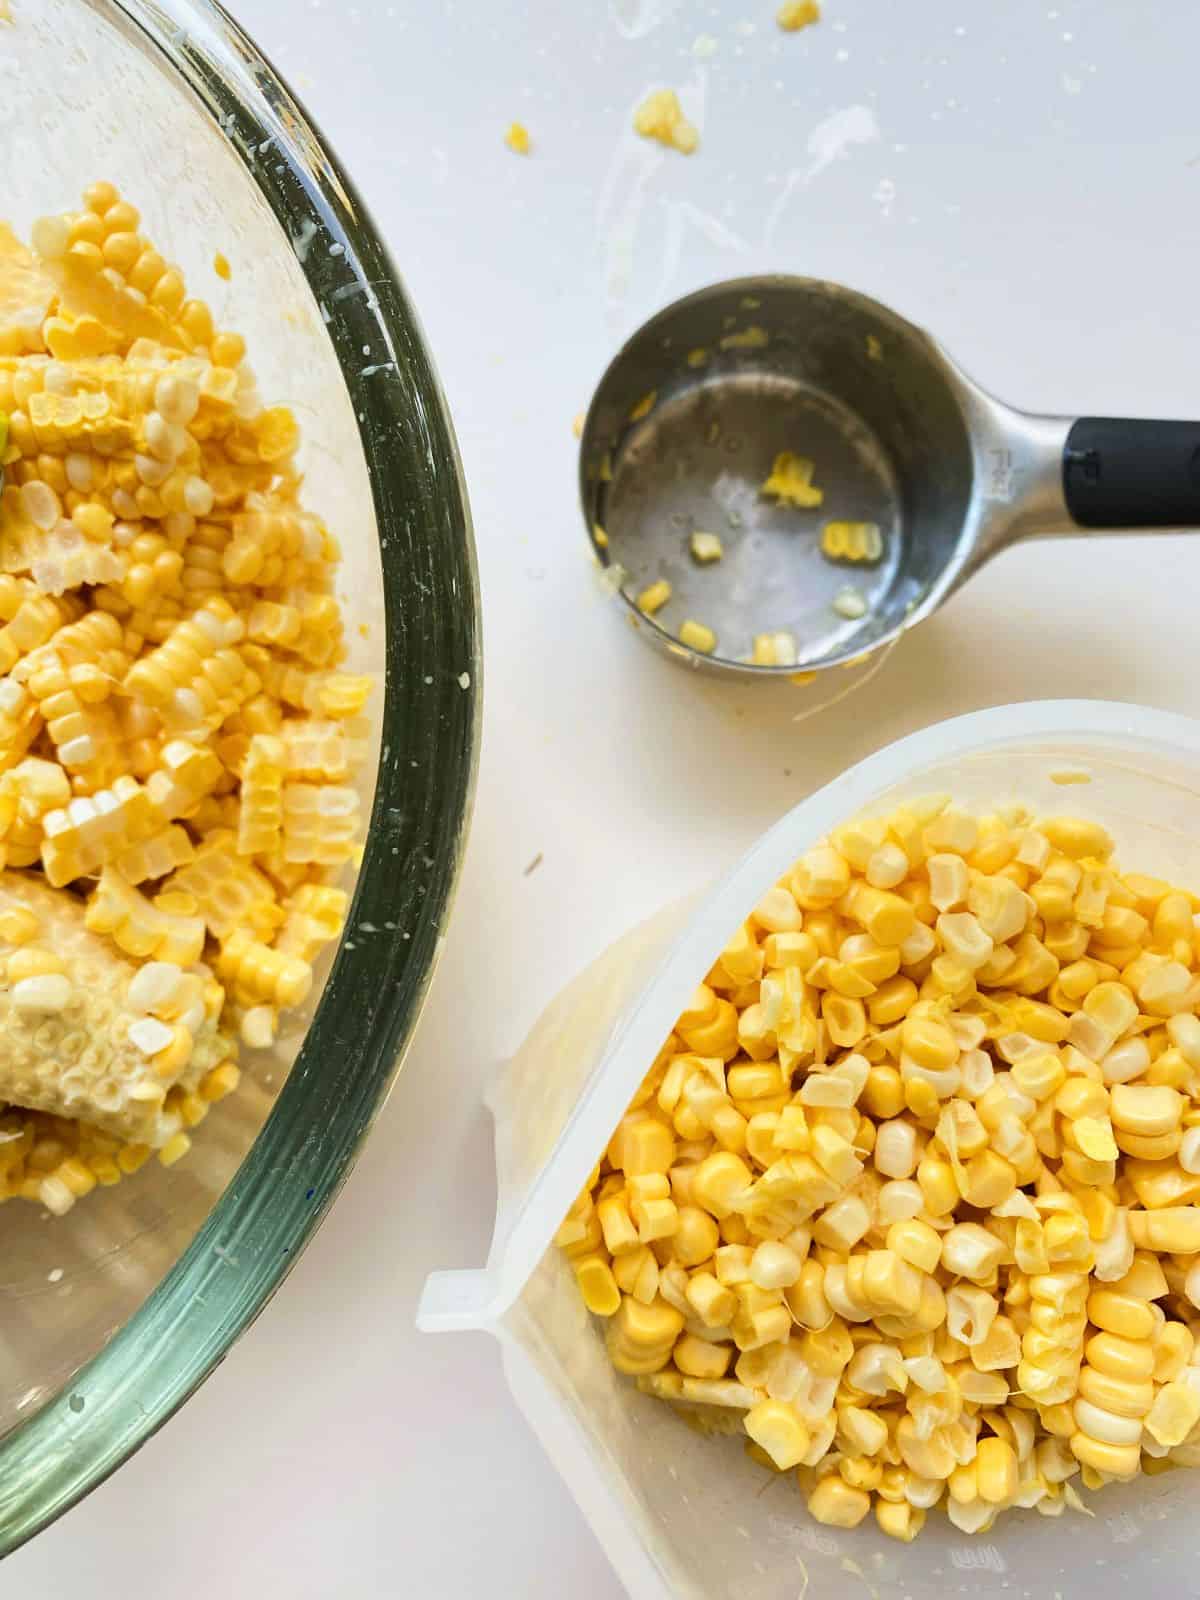 An image of a bowl of corn kernels, a measuring cup, and a partially filled silicone pouch filled with corn kernels ready for the freezer.